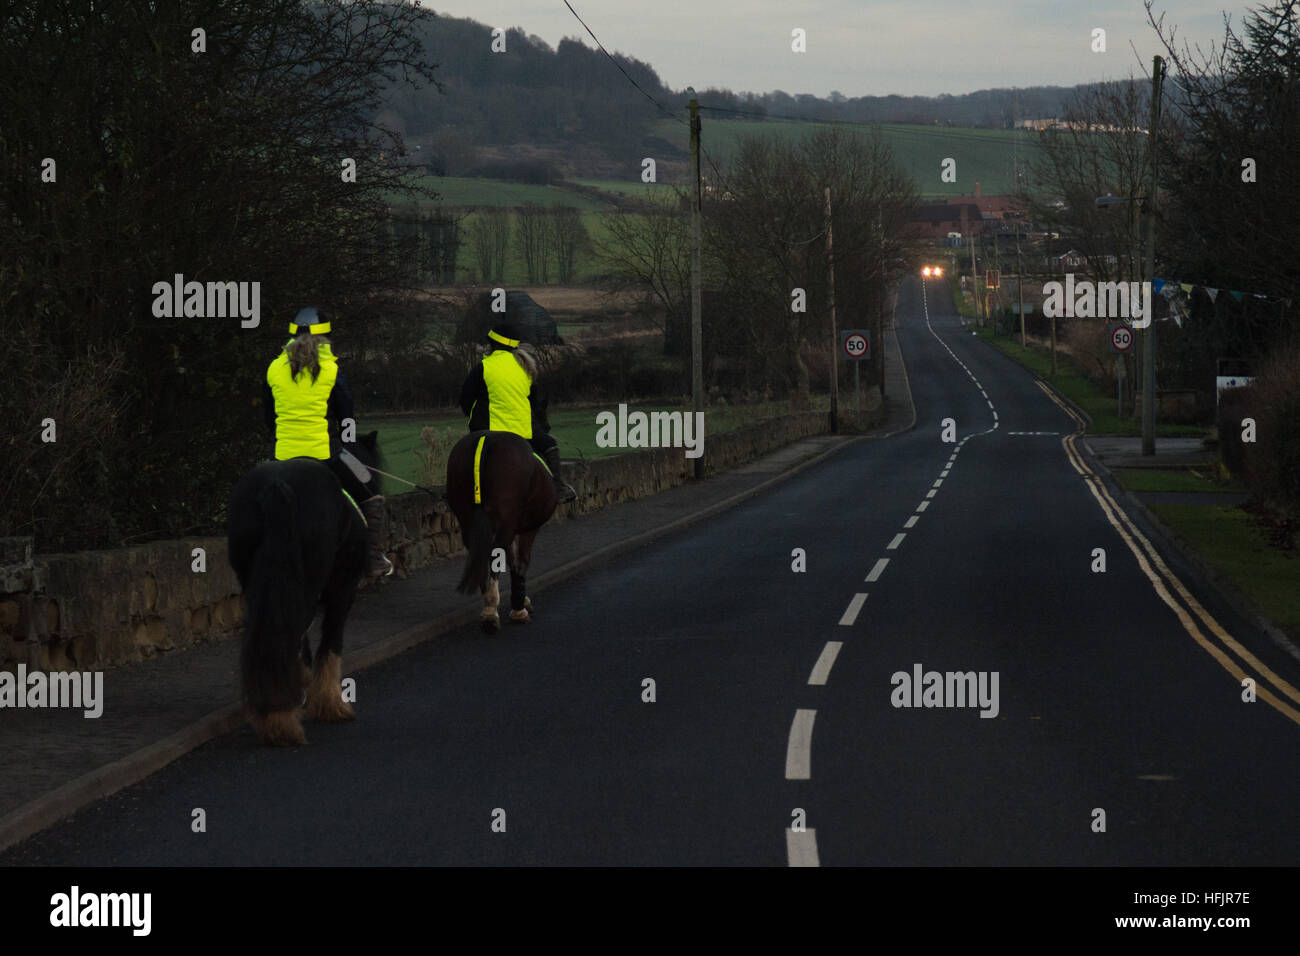 Two female horse riders wearing high visibilty clothing on dark rural road Stock Photo